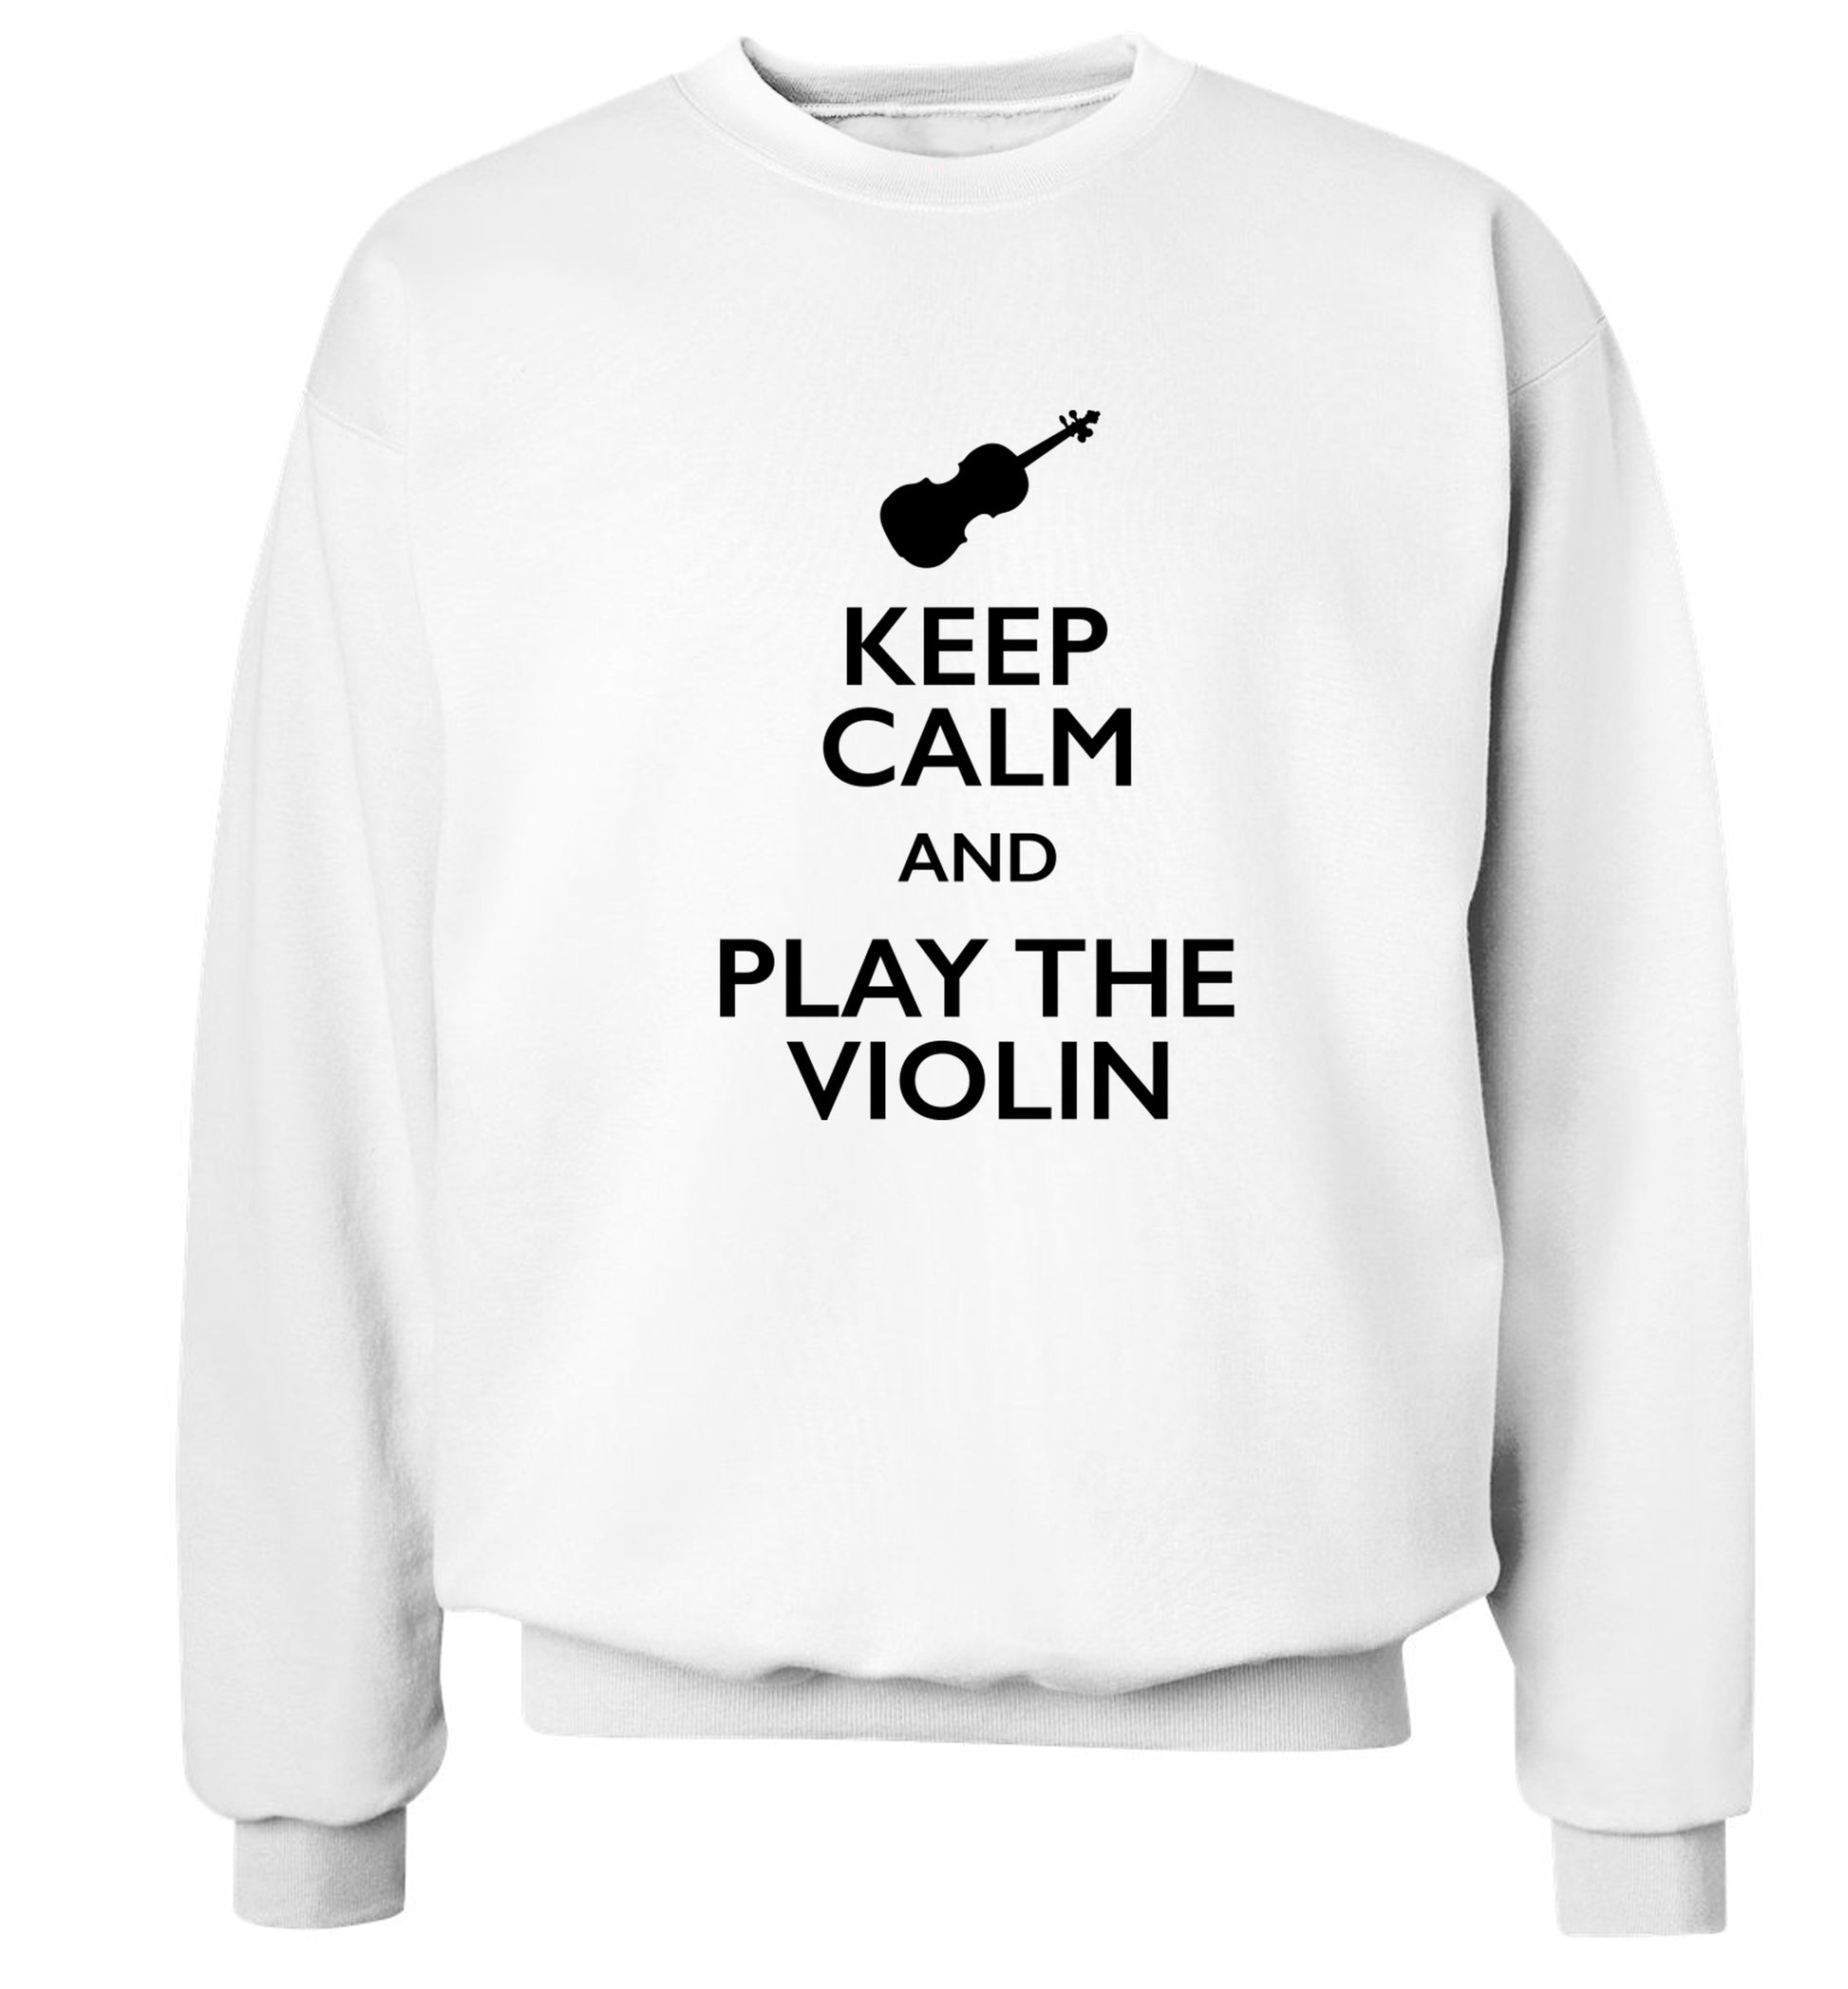 Keep calm and play the violin Adult's unisex white Sweater 2XL